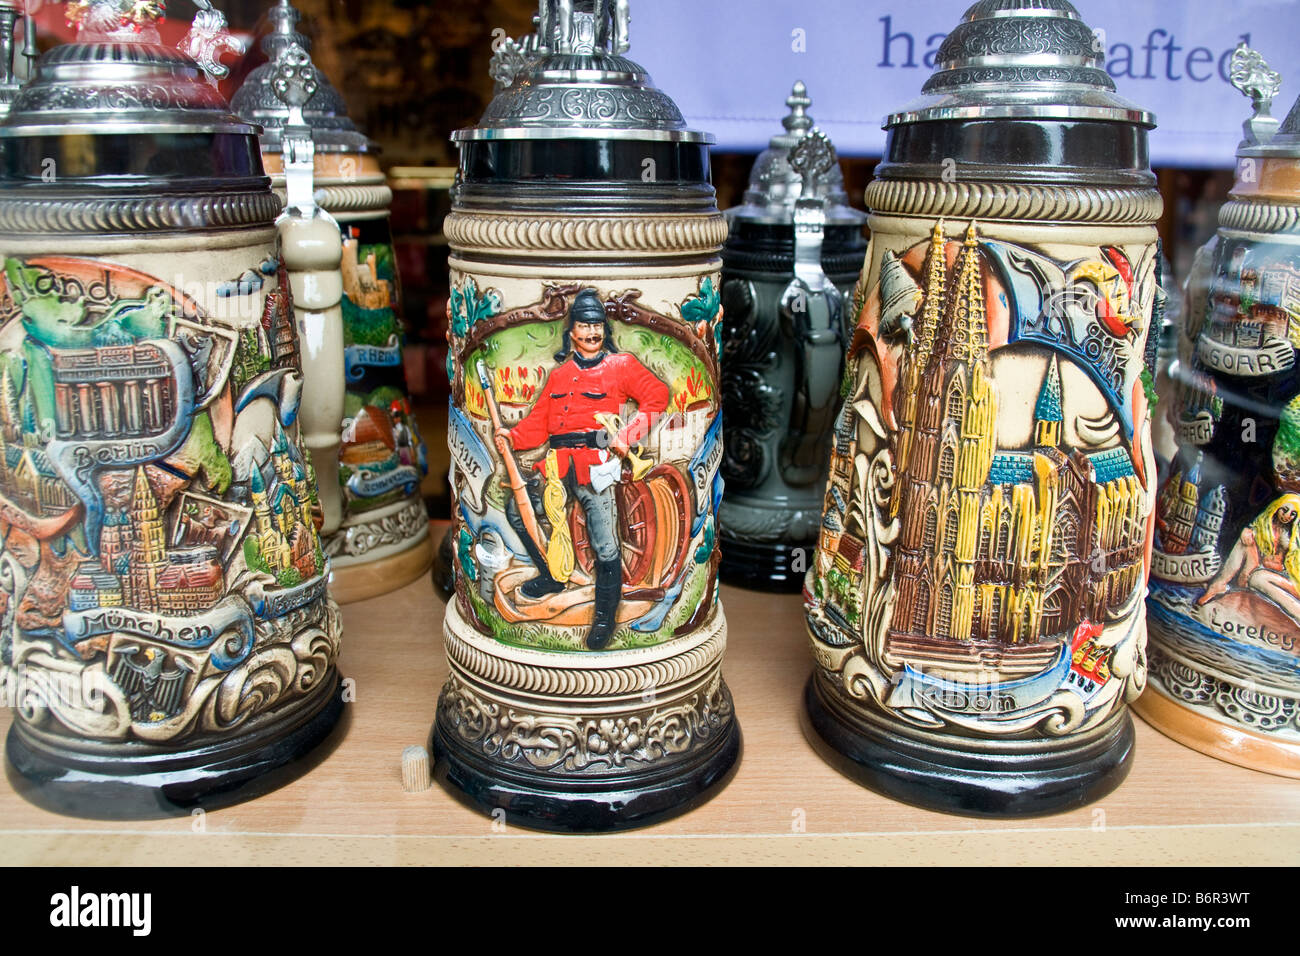 Cologne shop window display of decorative German porcelain beer steins Stock Photo